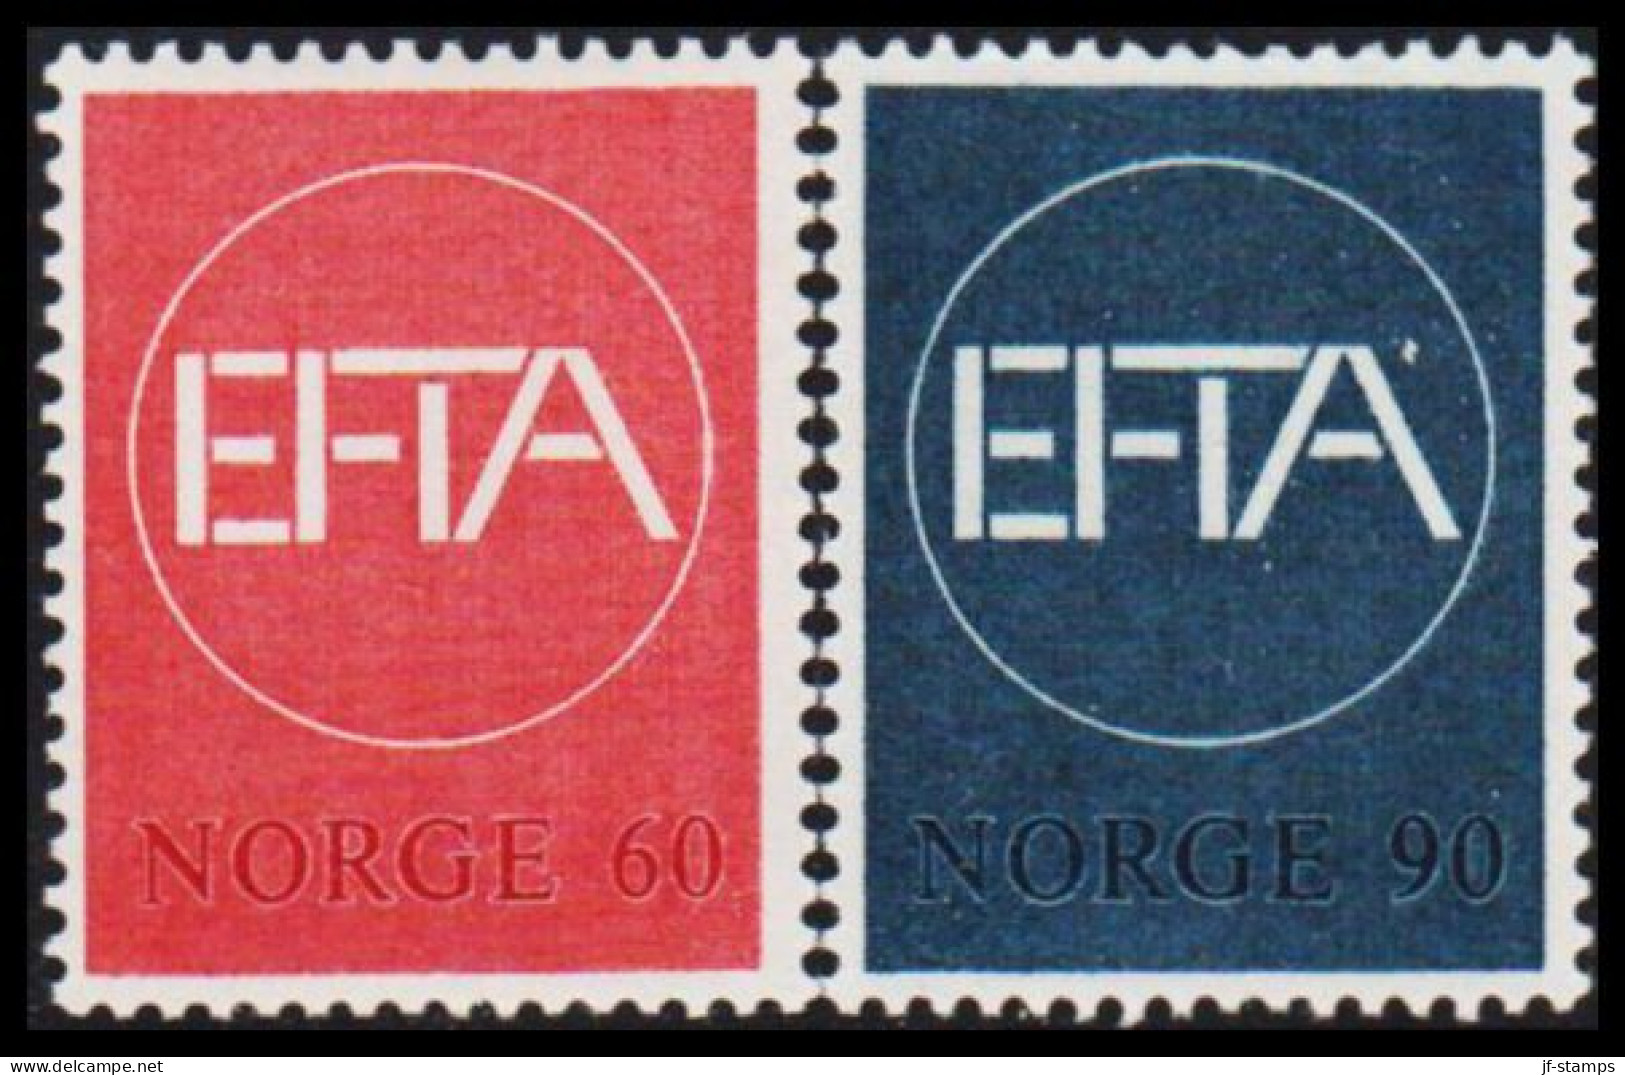 1967. NORGE. EFTA. Never Hinged Set.  (Michel 551552) - JF533390 - Covers & Documents